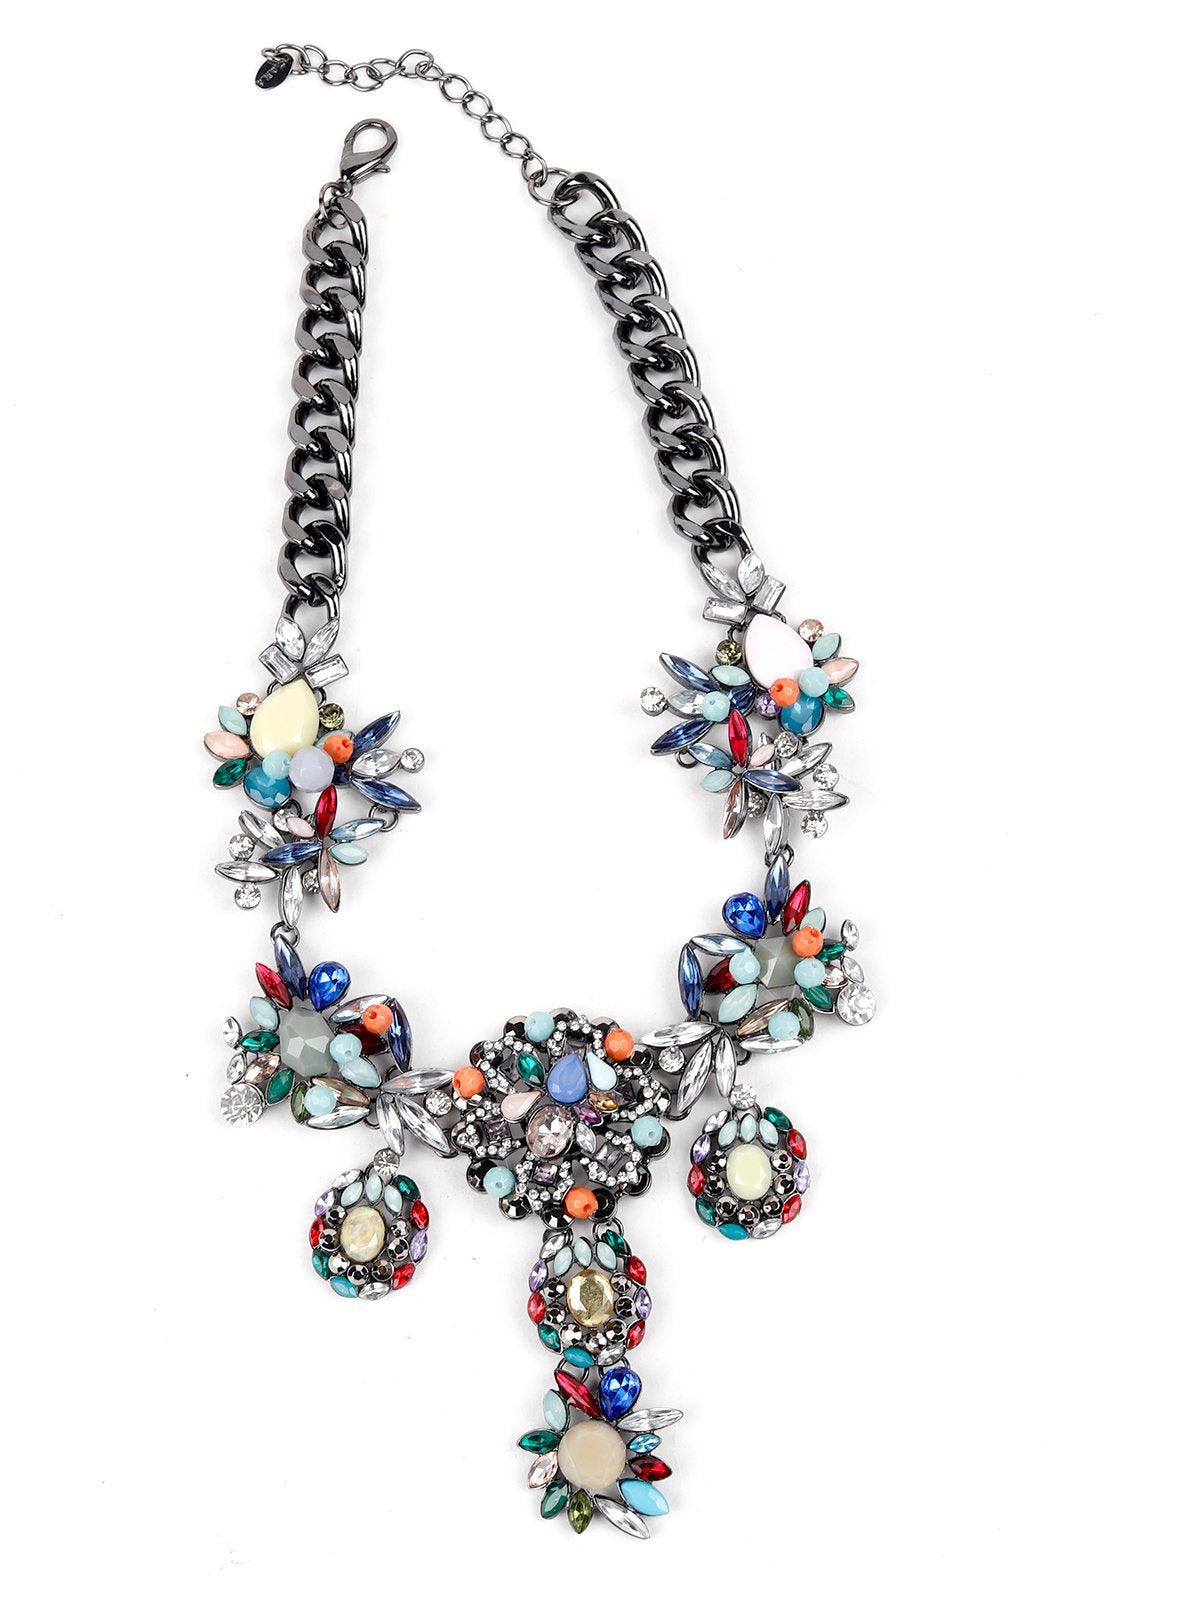 Jewel-Tone & Grey Chain Floral Necklace - Odette